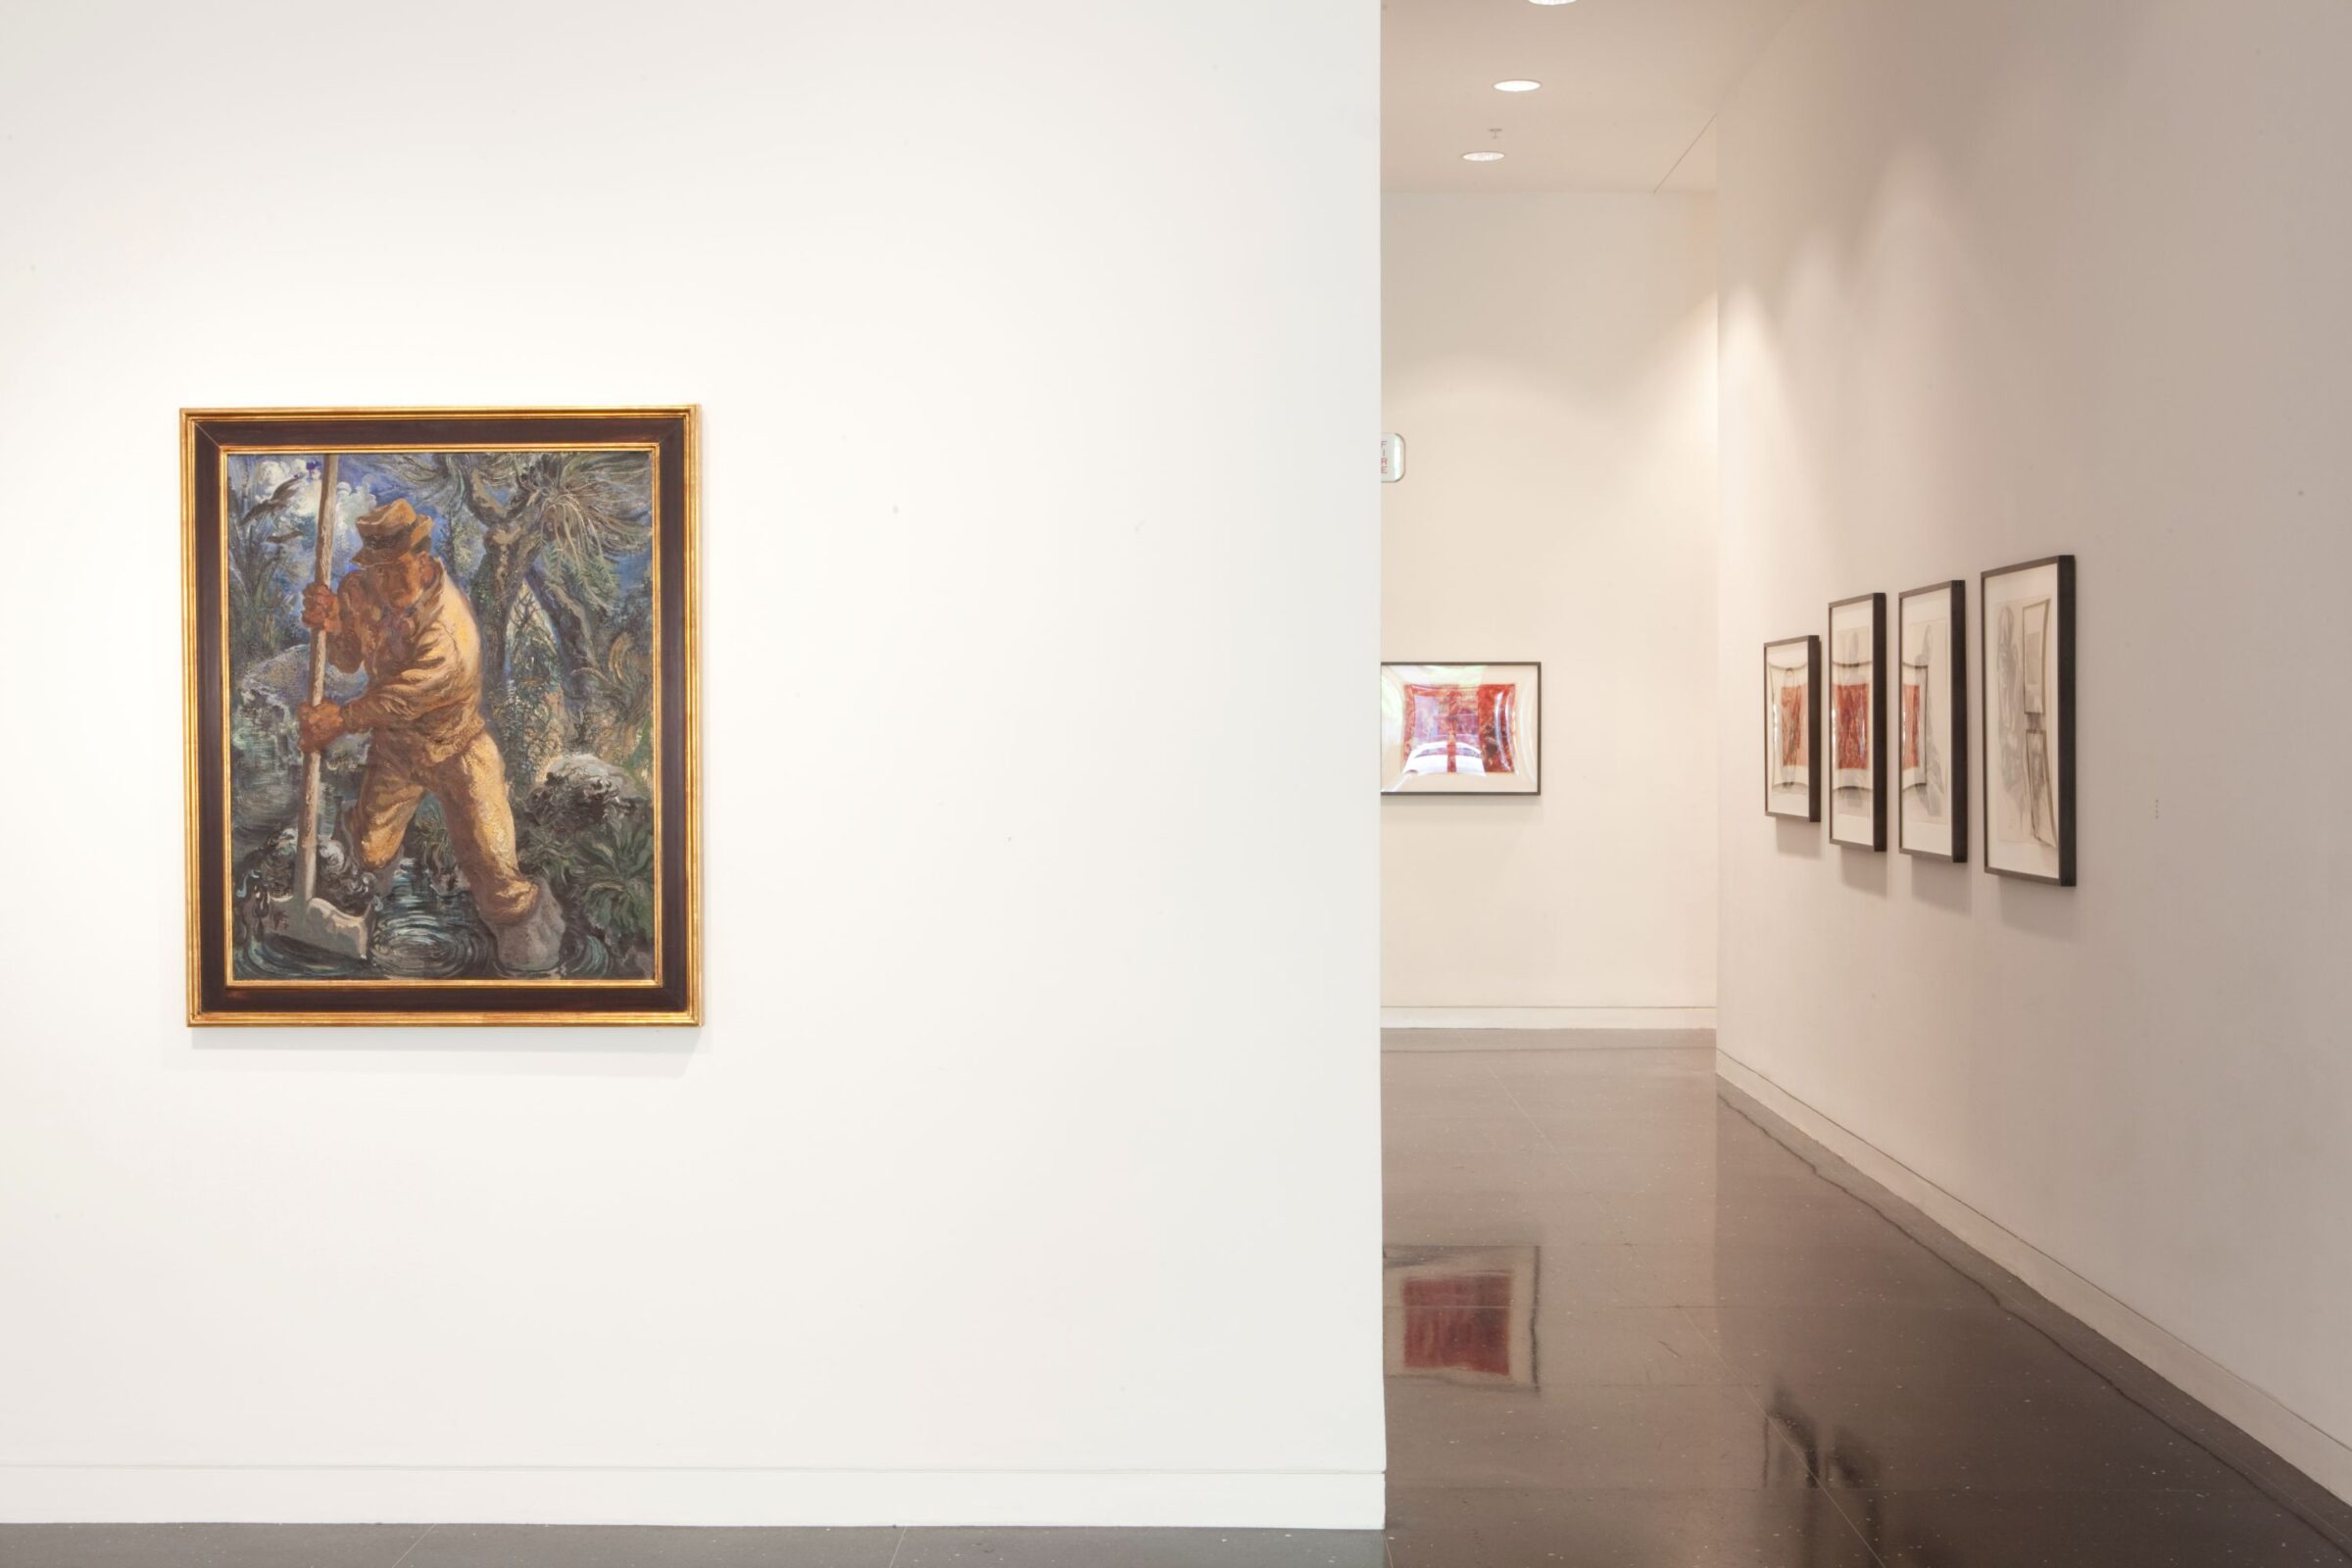 A white gallery space with several framed artworks on the walls. To the right and closest to the viewer is a painting of a figure shoveling mud set inside a gold frame.